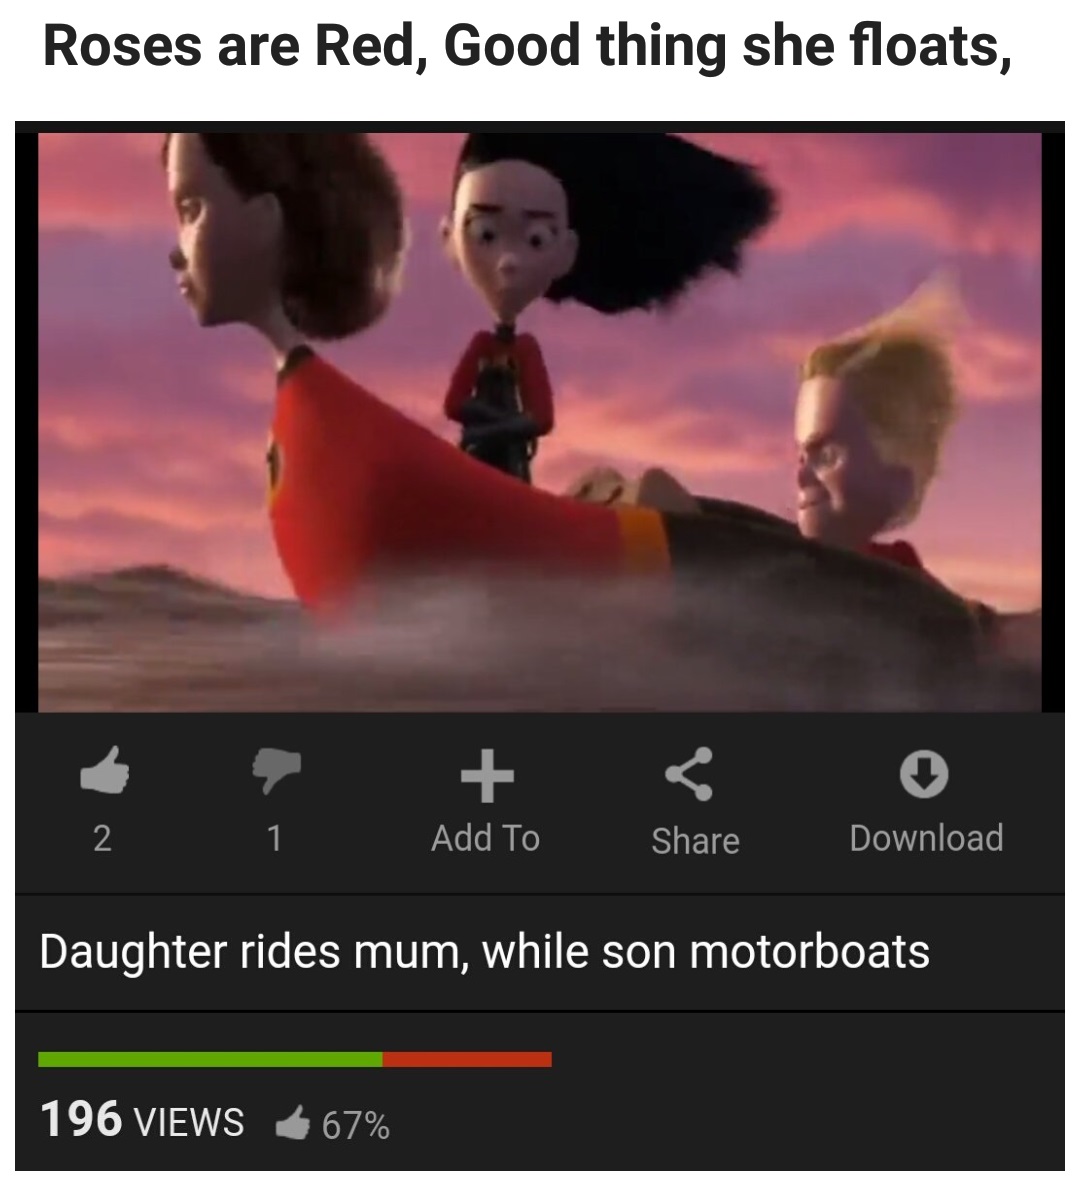 daughter rides mum - Roses are Red, Good thing she floats, Add To Download Daughter...